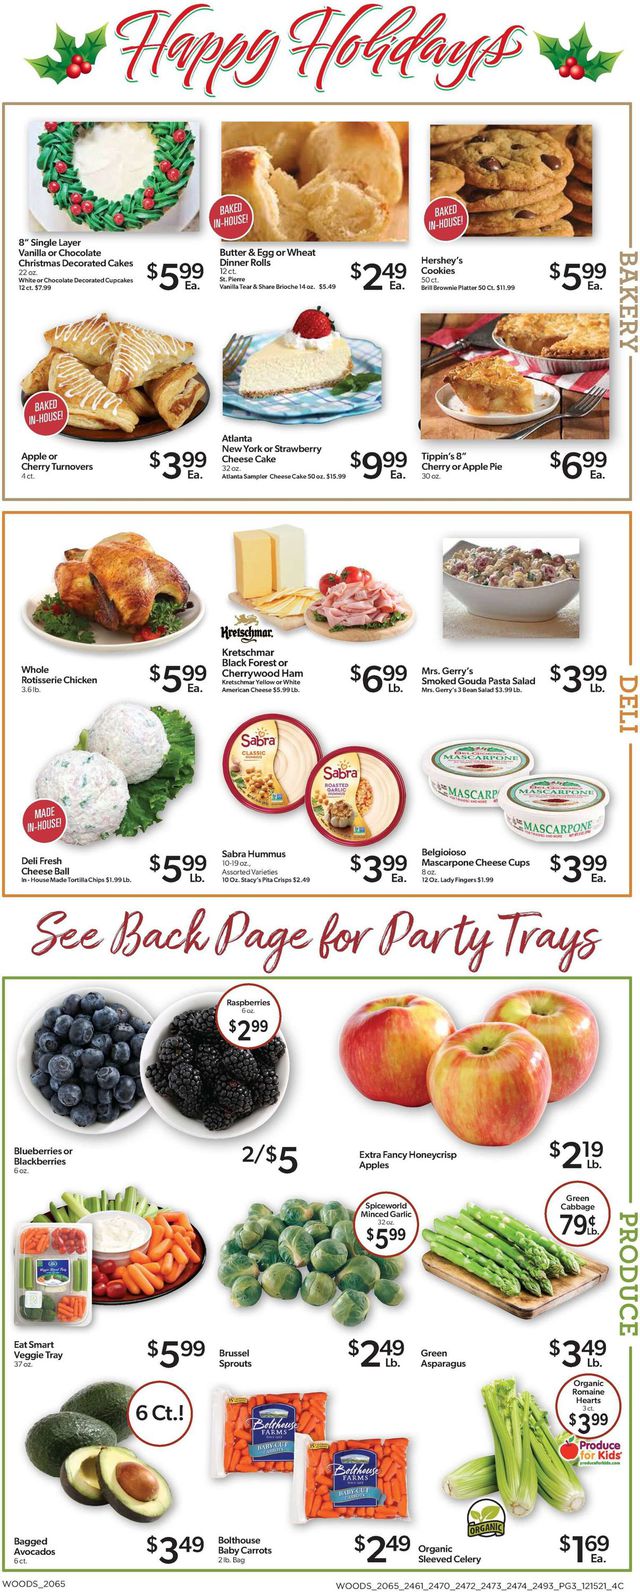 Woods Supermarket Ad from 12/15/2021